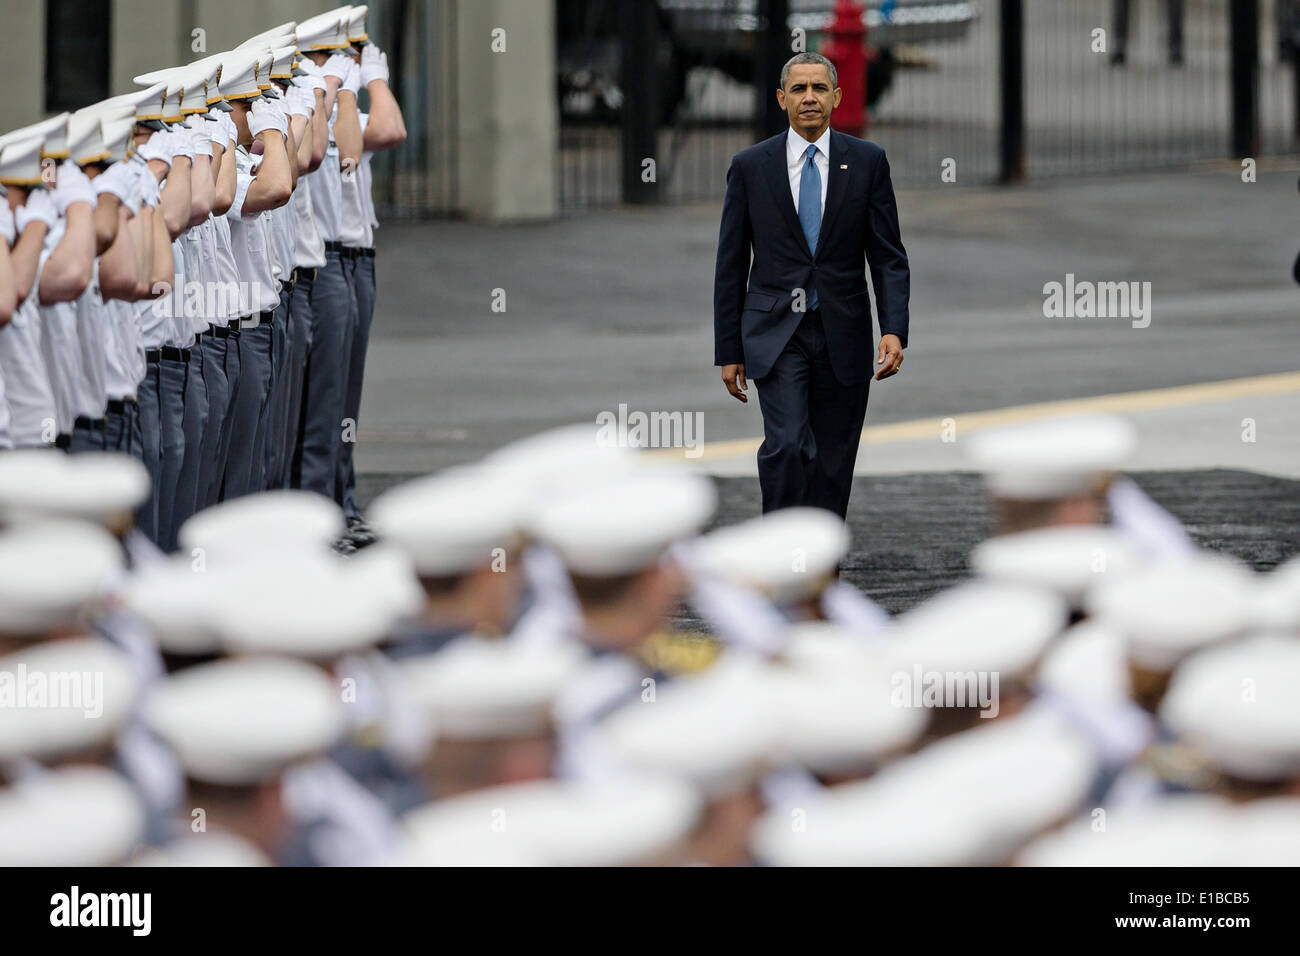 US President Barack Obama passes cadets as he enters Michie Stadium to give the commencement address during graduation ceremonies at the U.S. Military Academy May 28, 2014 in West Point, New York. Stock Photo